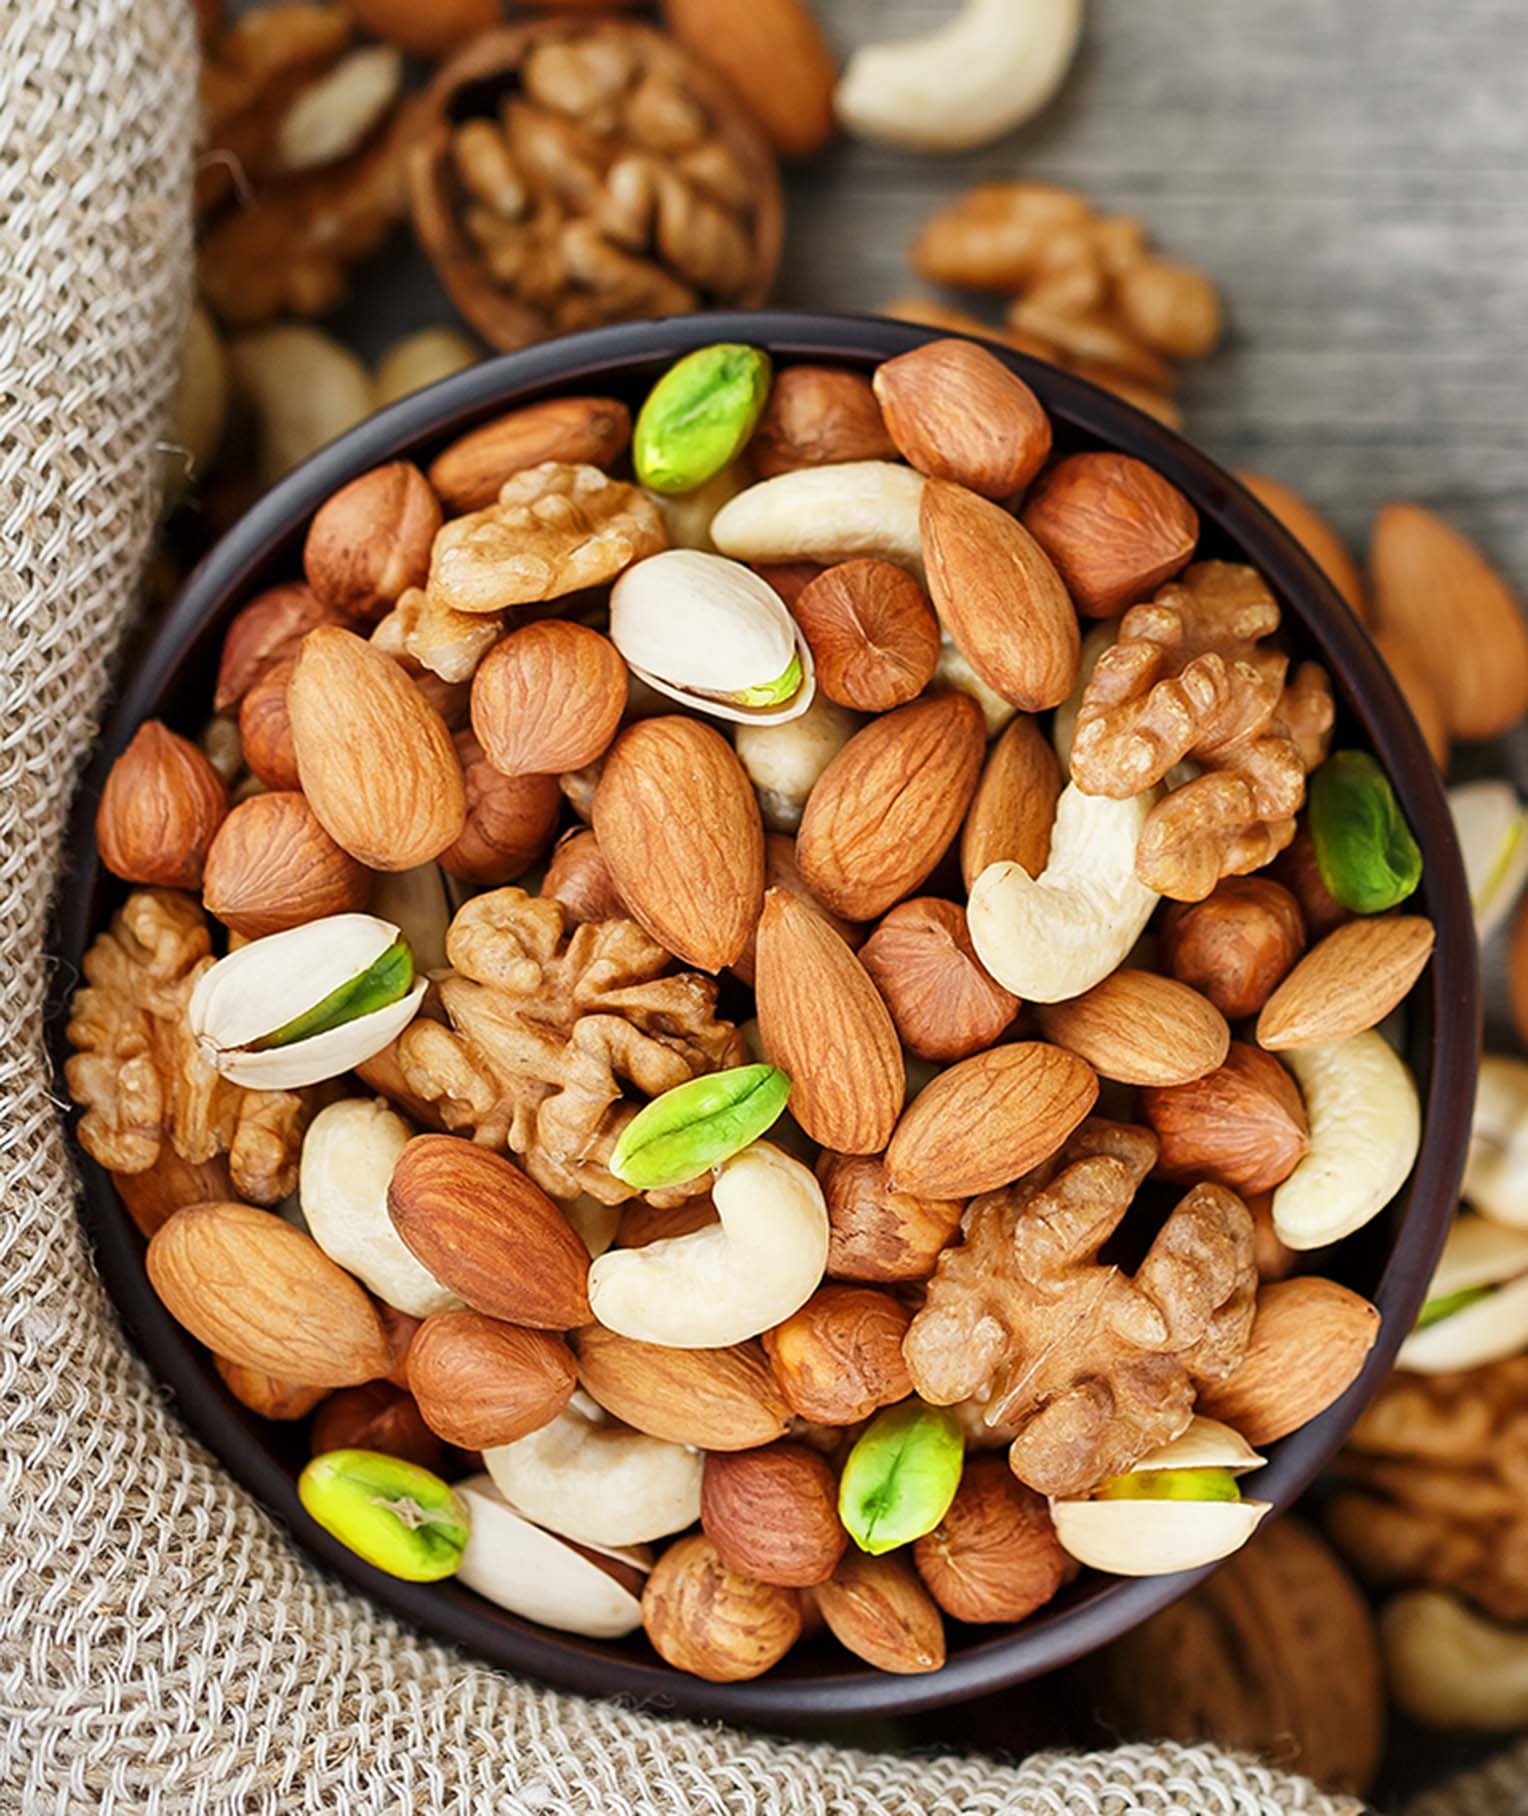 Benefits of Raw Nuts: Which Nuts Are Healthiest